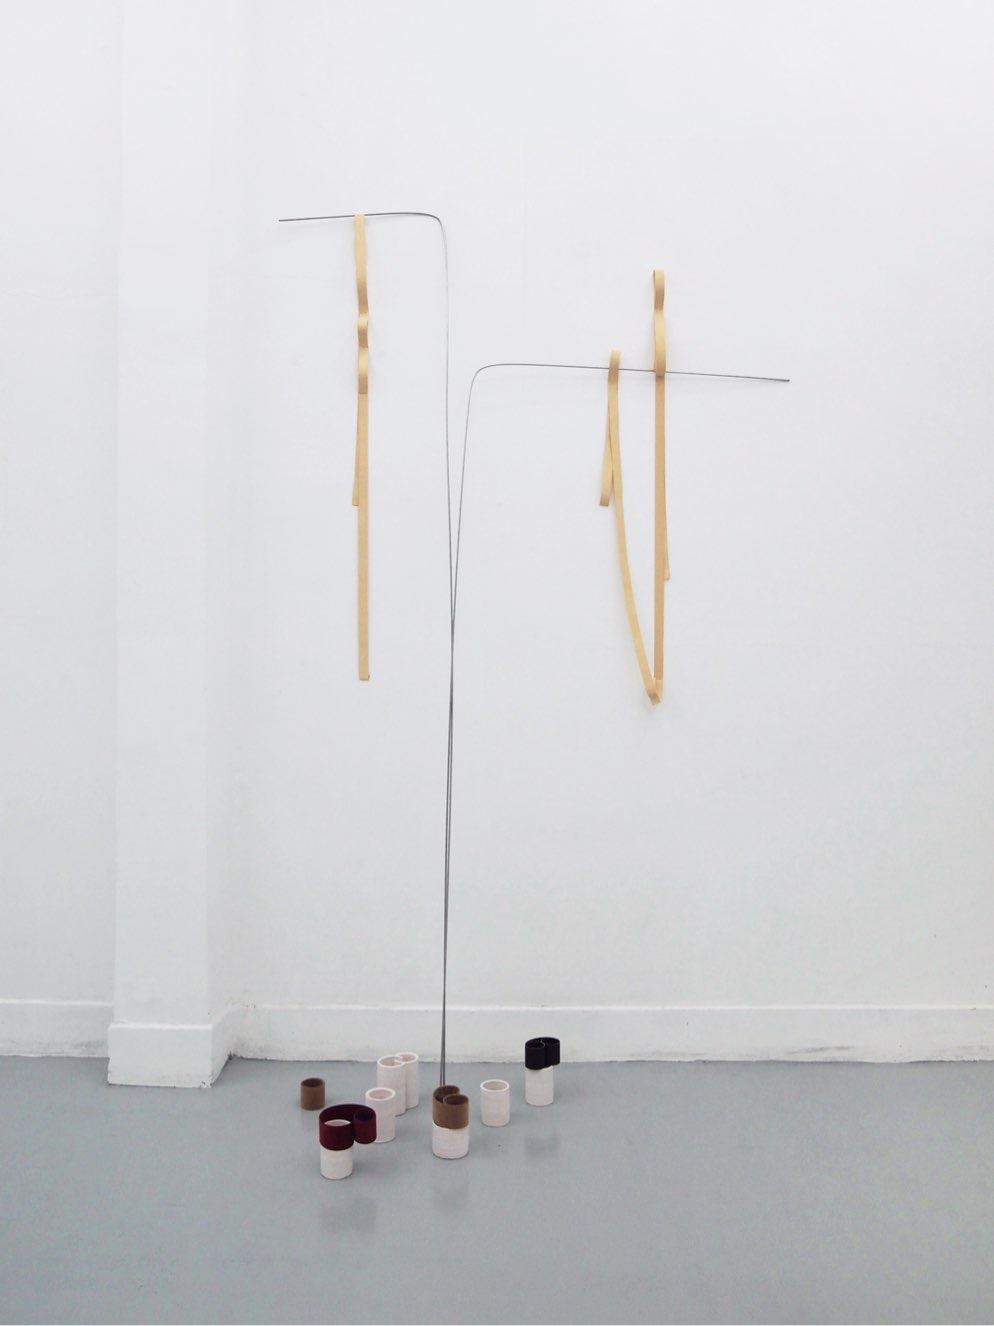 He Yida Tie up loose ends, 2014 Elastic band, stainless steel rod,